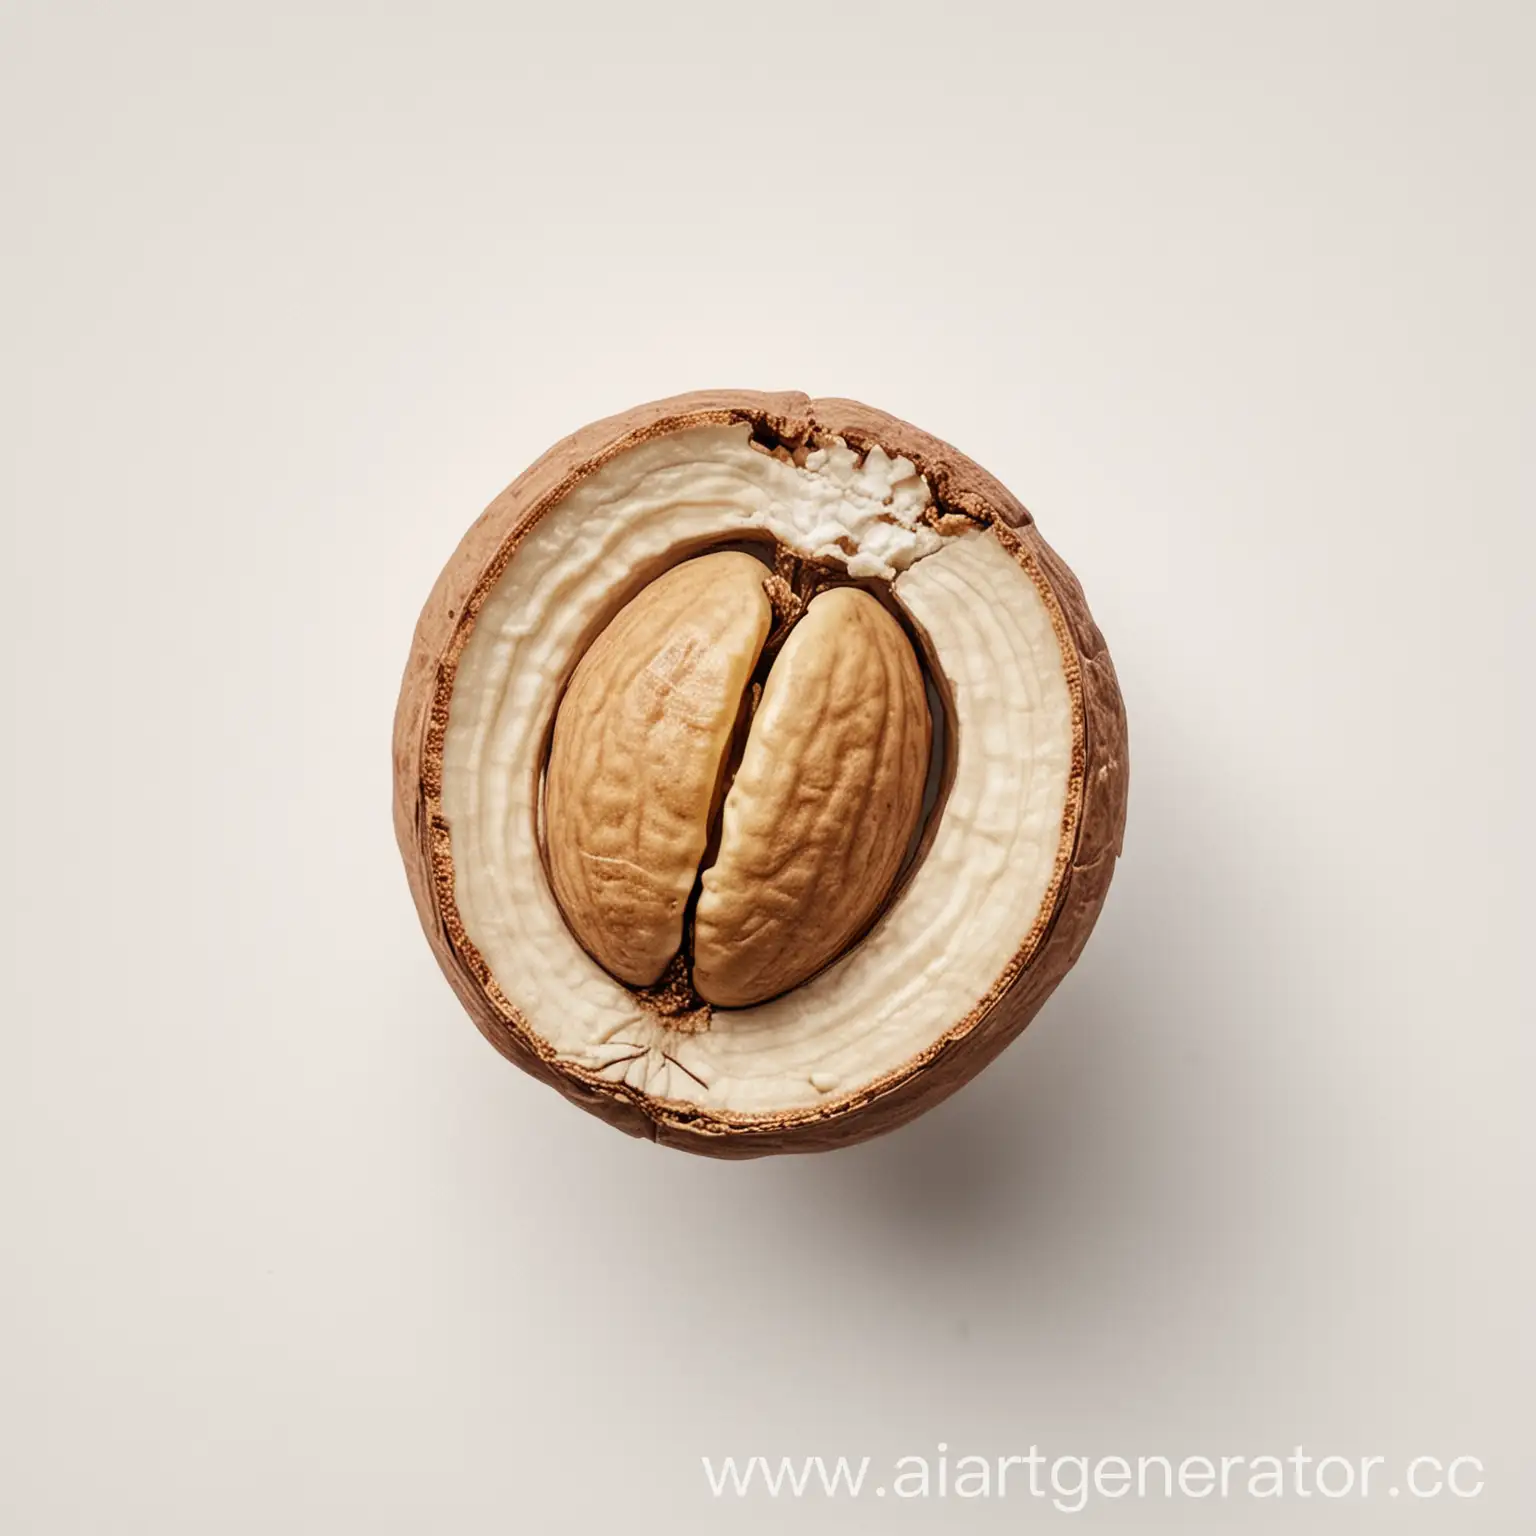 one Nuts , white background